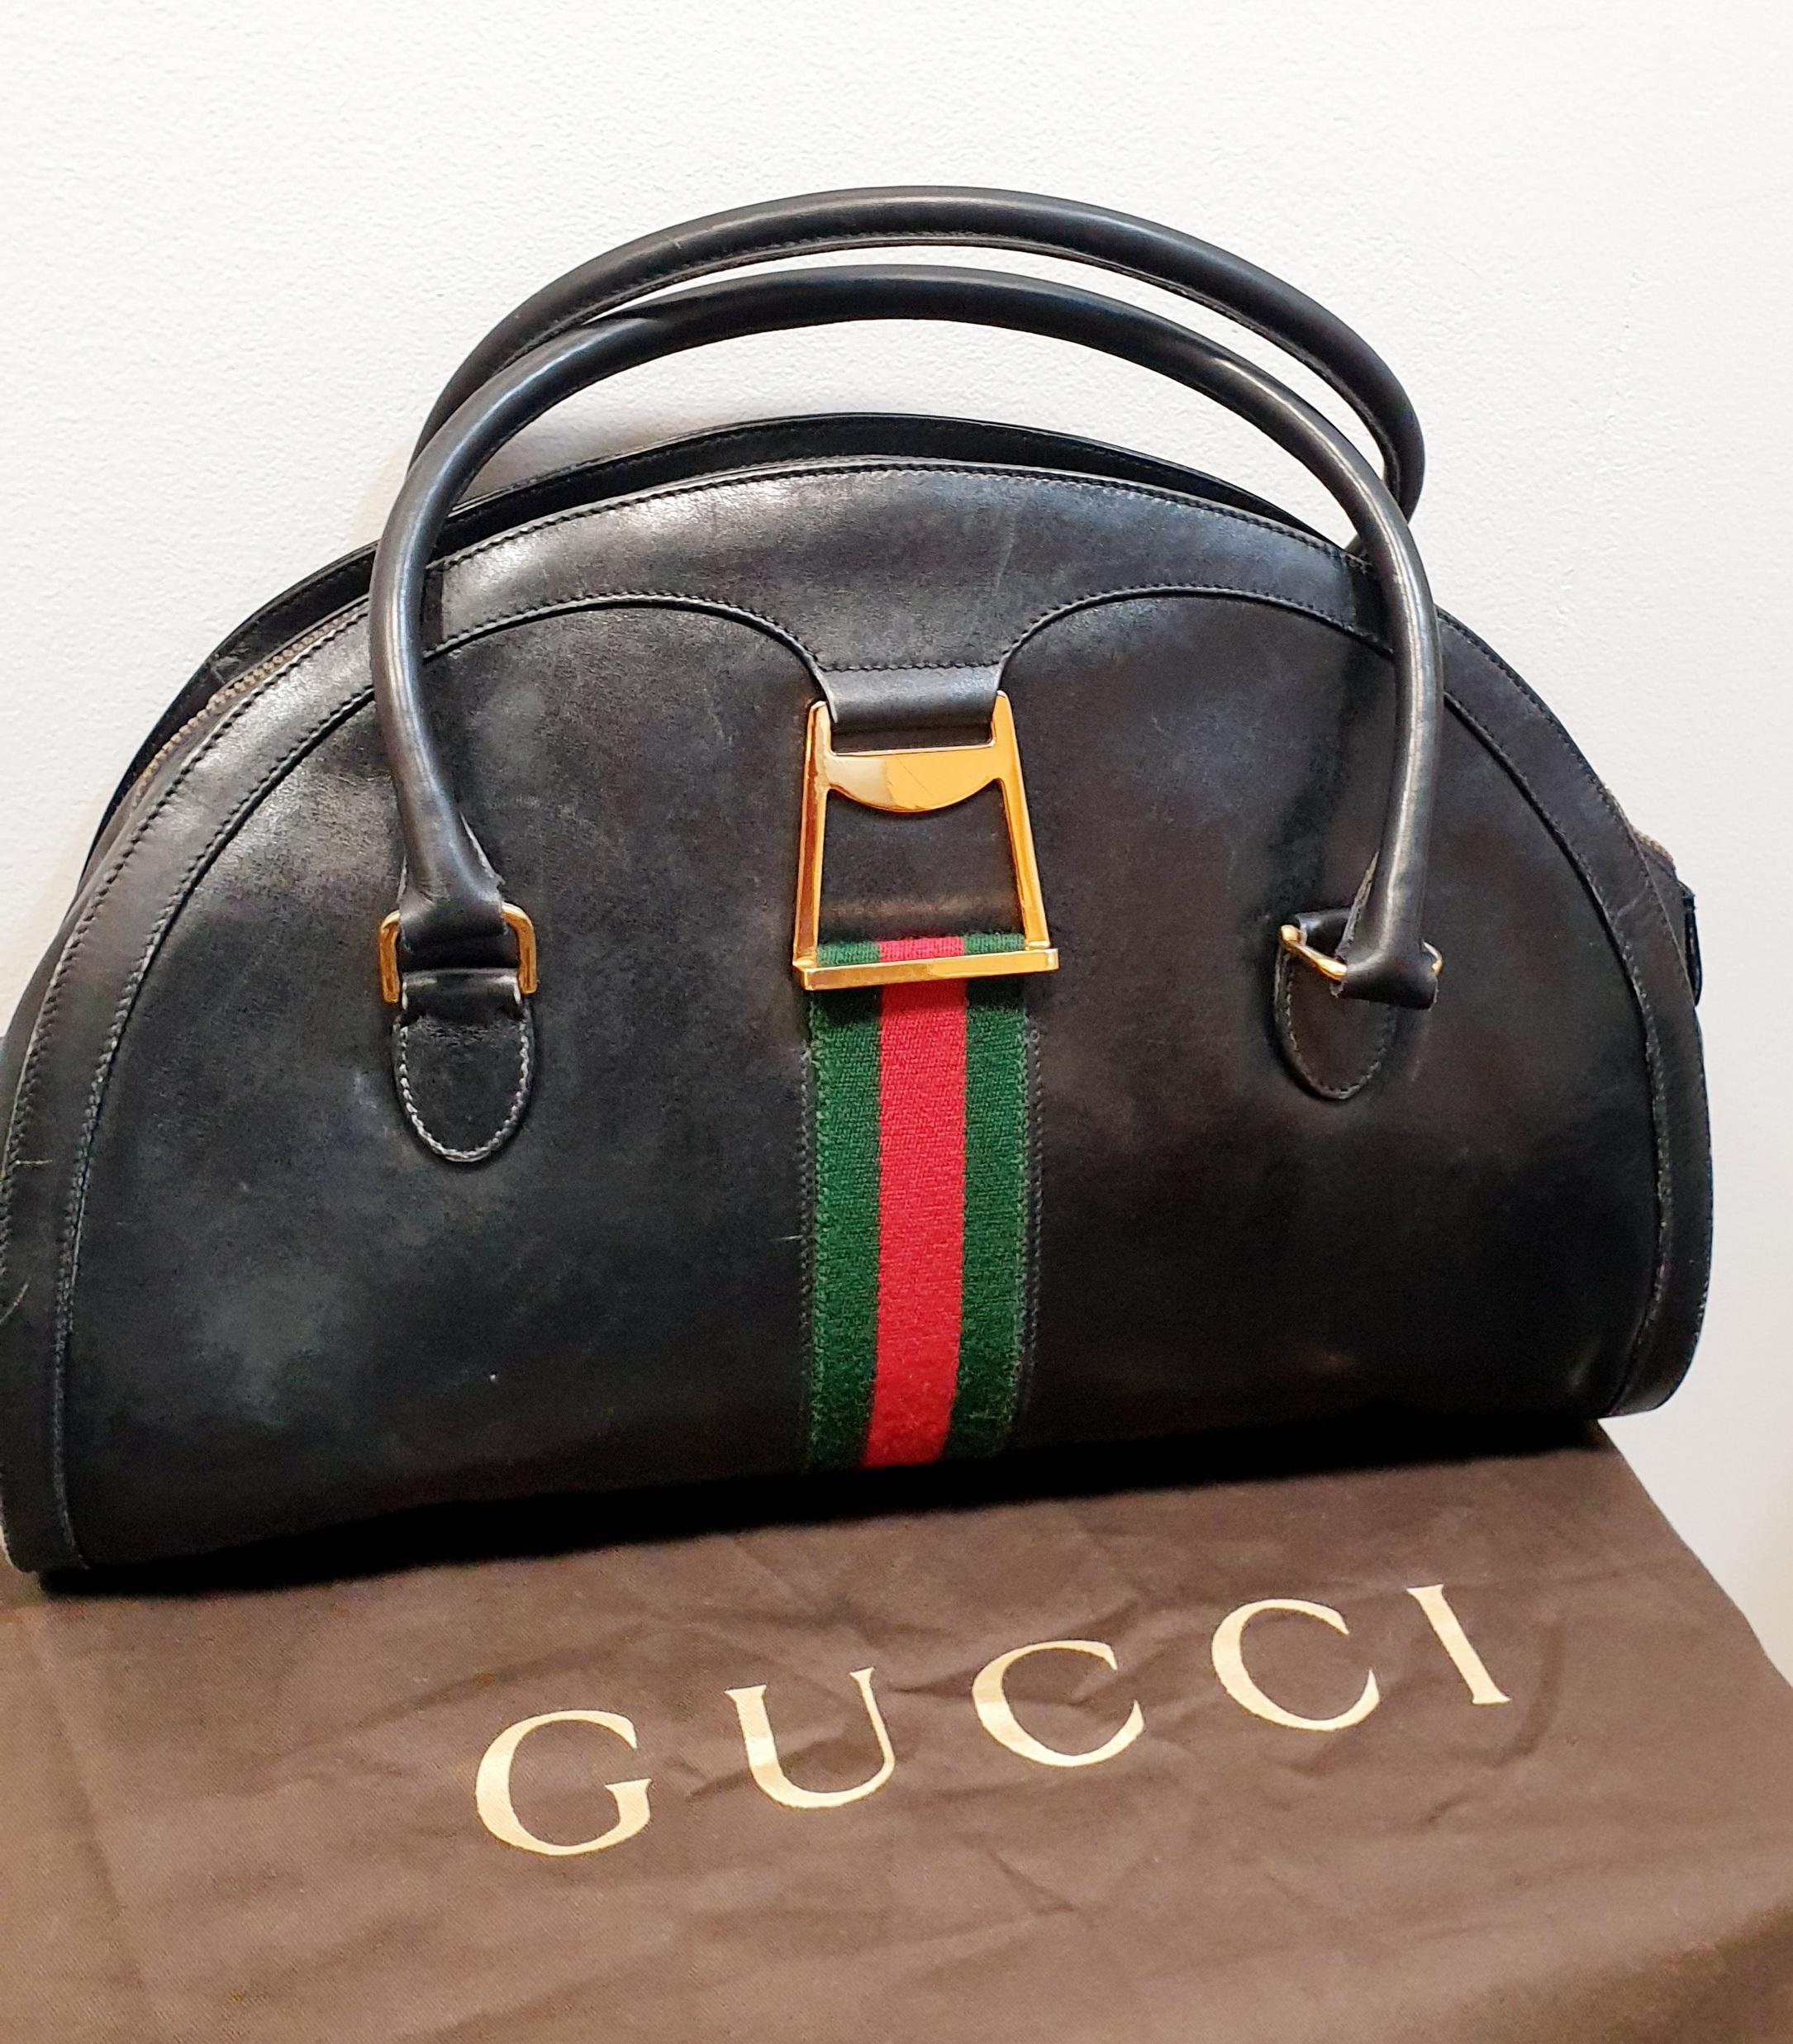 Gucci Vintage Web Boston Black Leather Bag
Material Leather
Color Black
Length   45 cm  17,71 inches
Height    31 cm  12,20 inches
Width     18 cm  7,08 inches

PRADERA Fashion Division  is specialised in European Fashion designers, clothing,